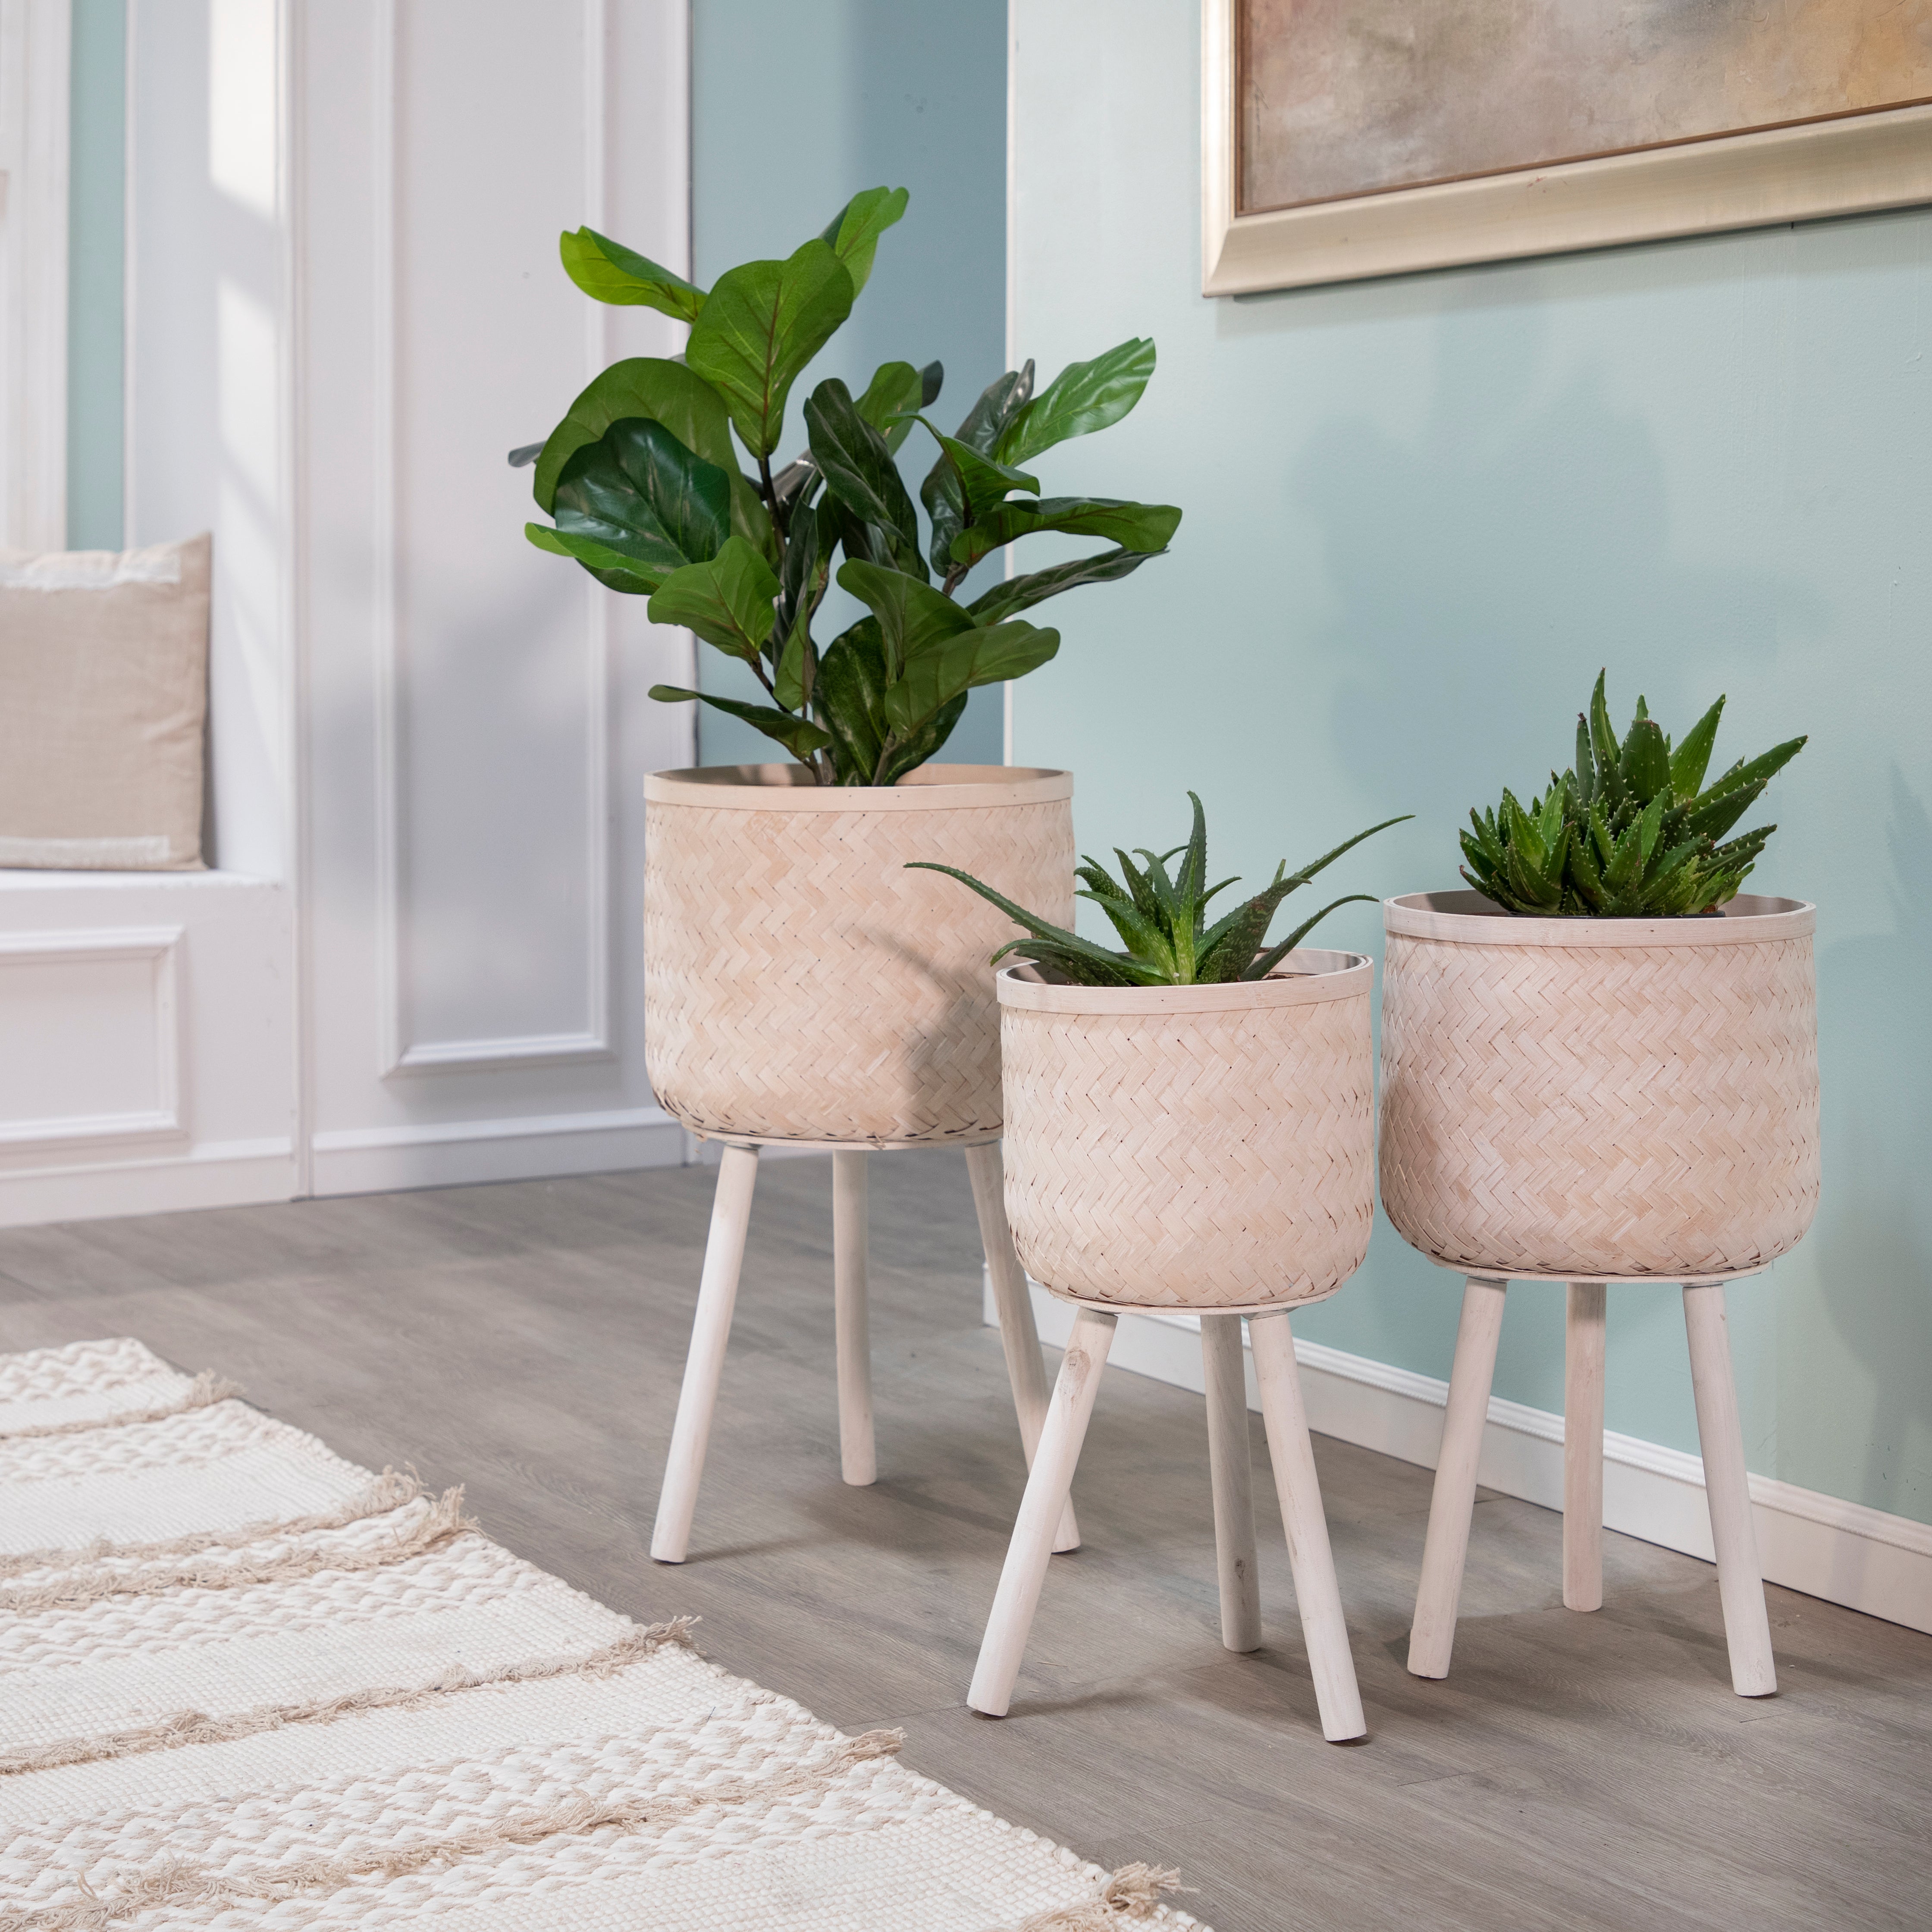 Set of 3 Bamboo Planters White Wash, Planters